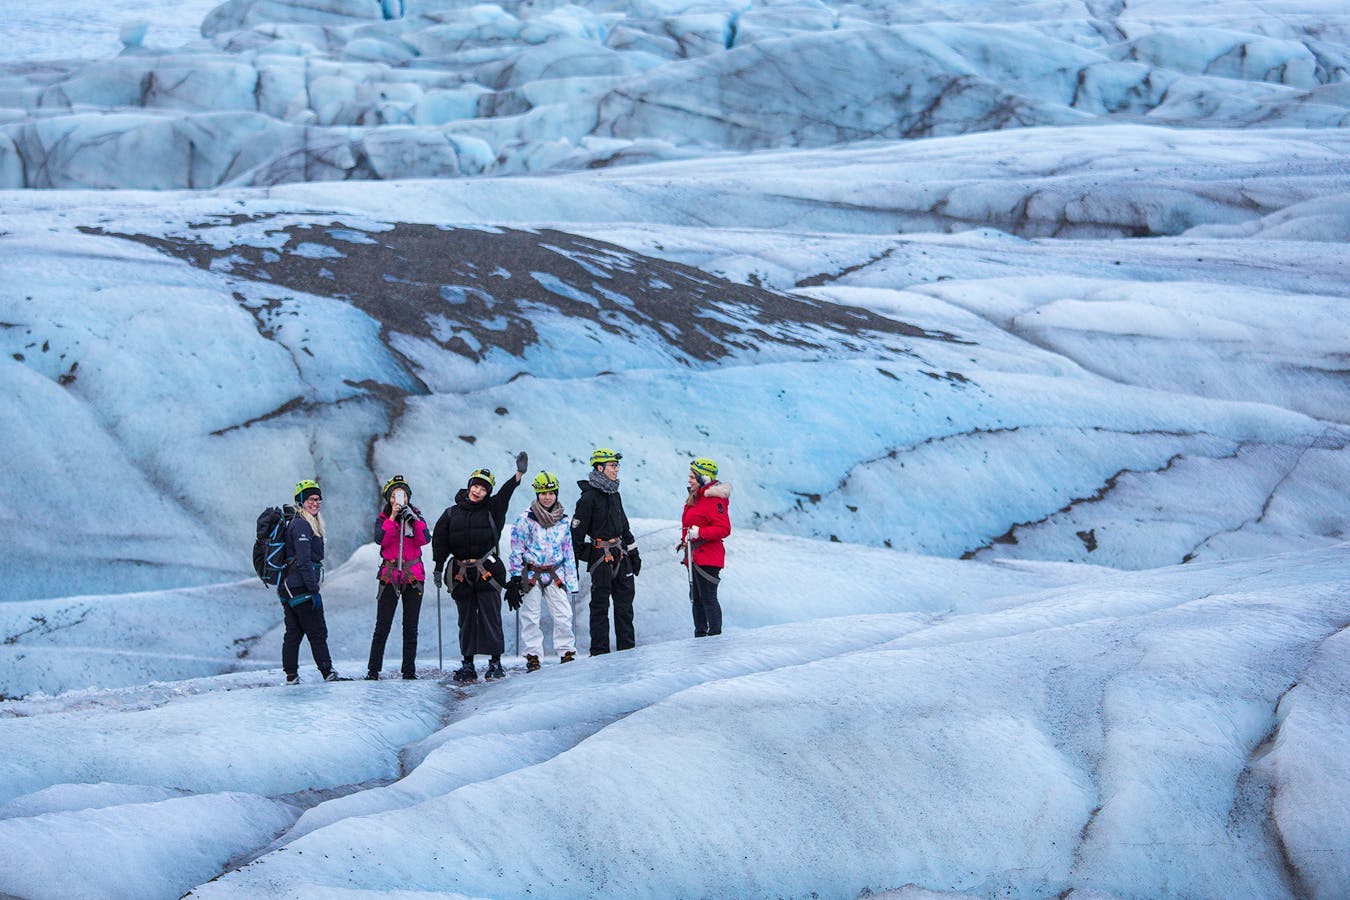 Your glacier hike might also include a spot of climbing with ice axes.